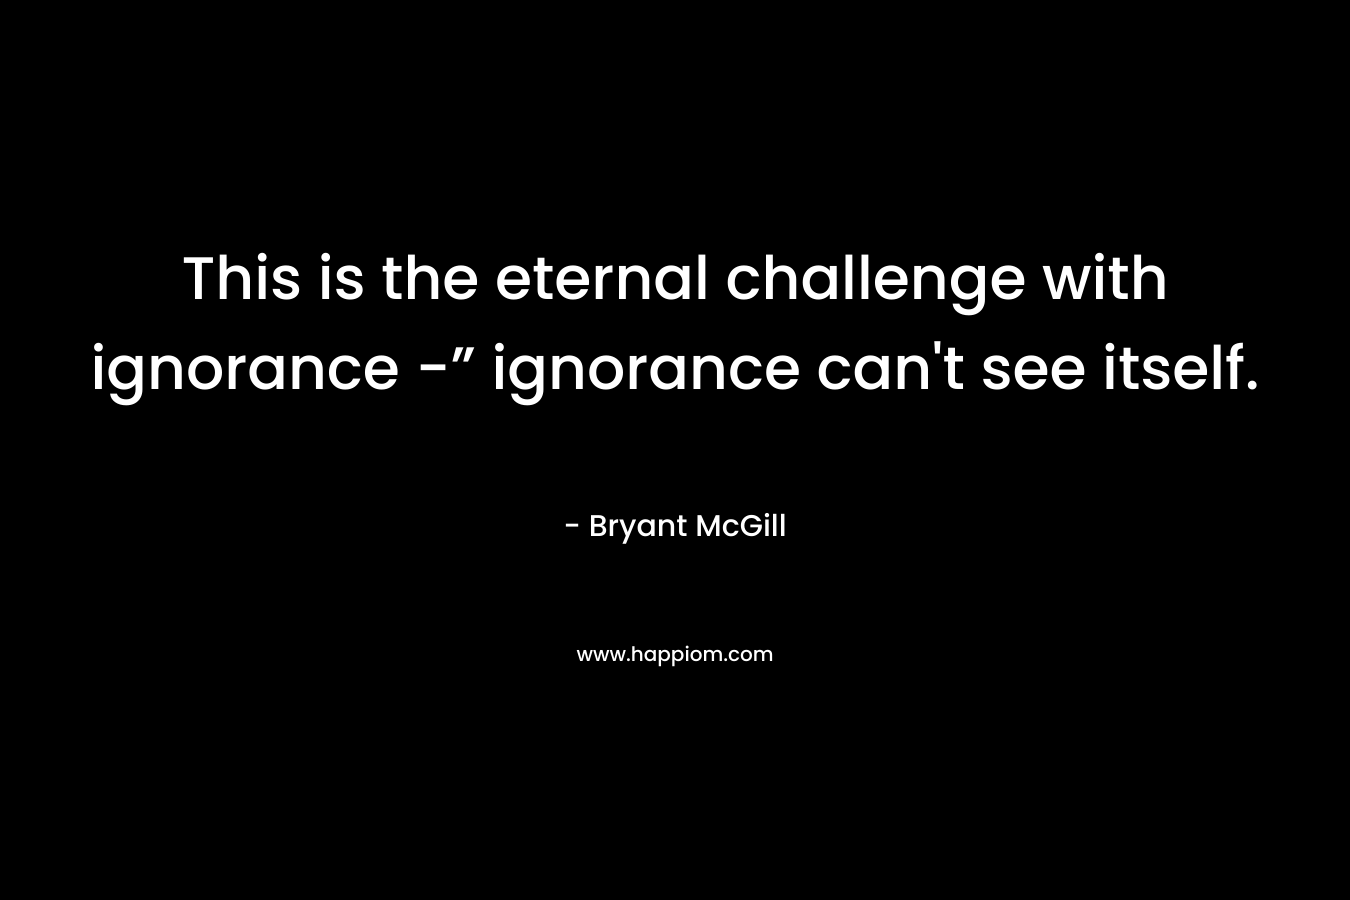 This is the eternal challenge with ignorance -” ignorance can't see itself.